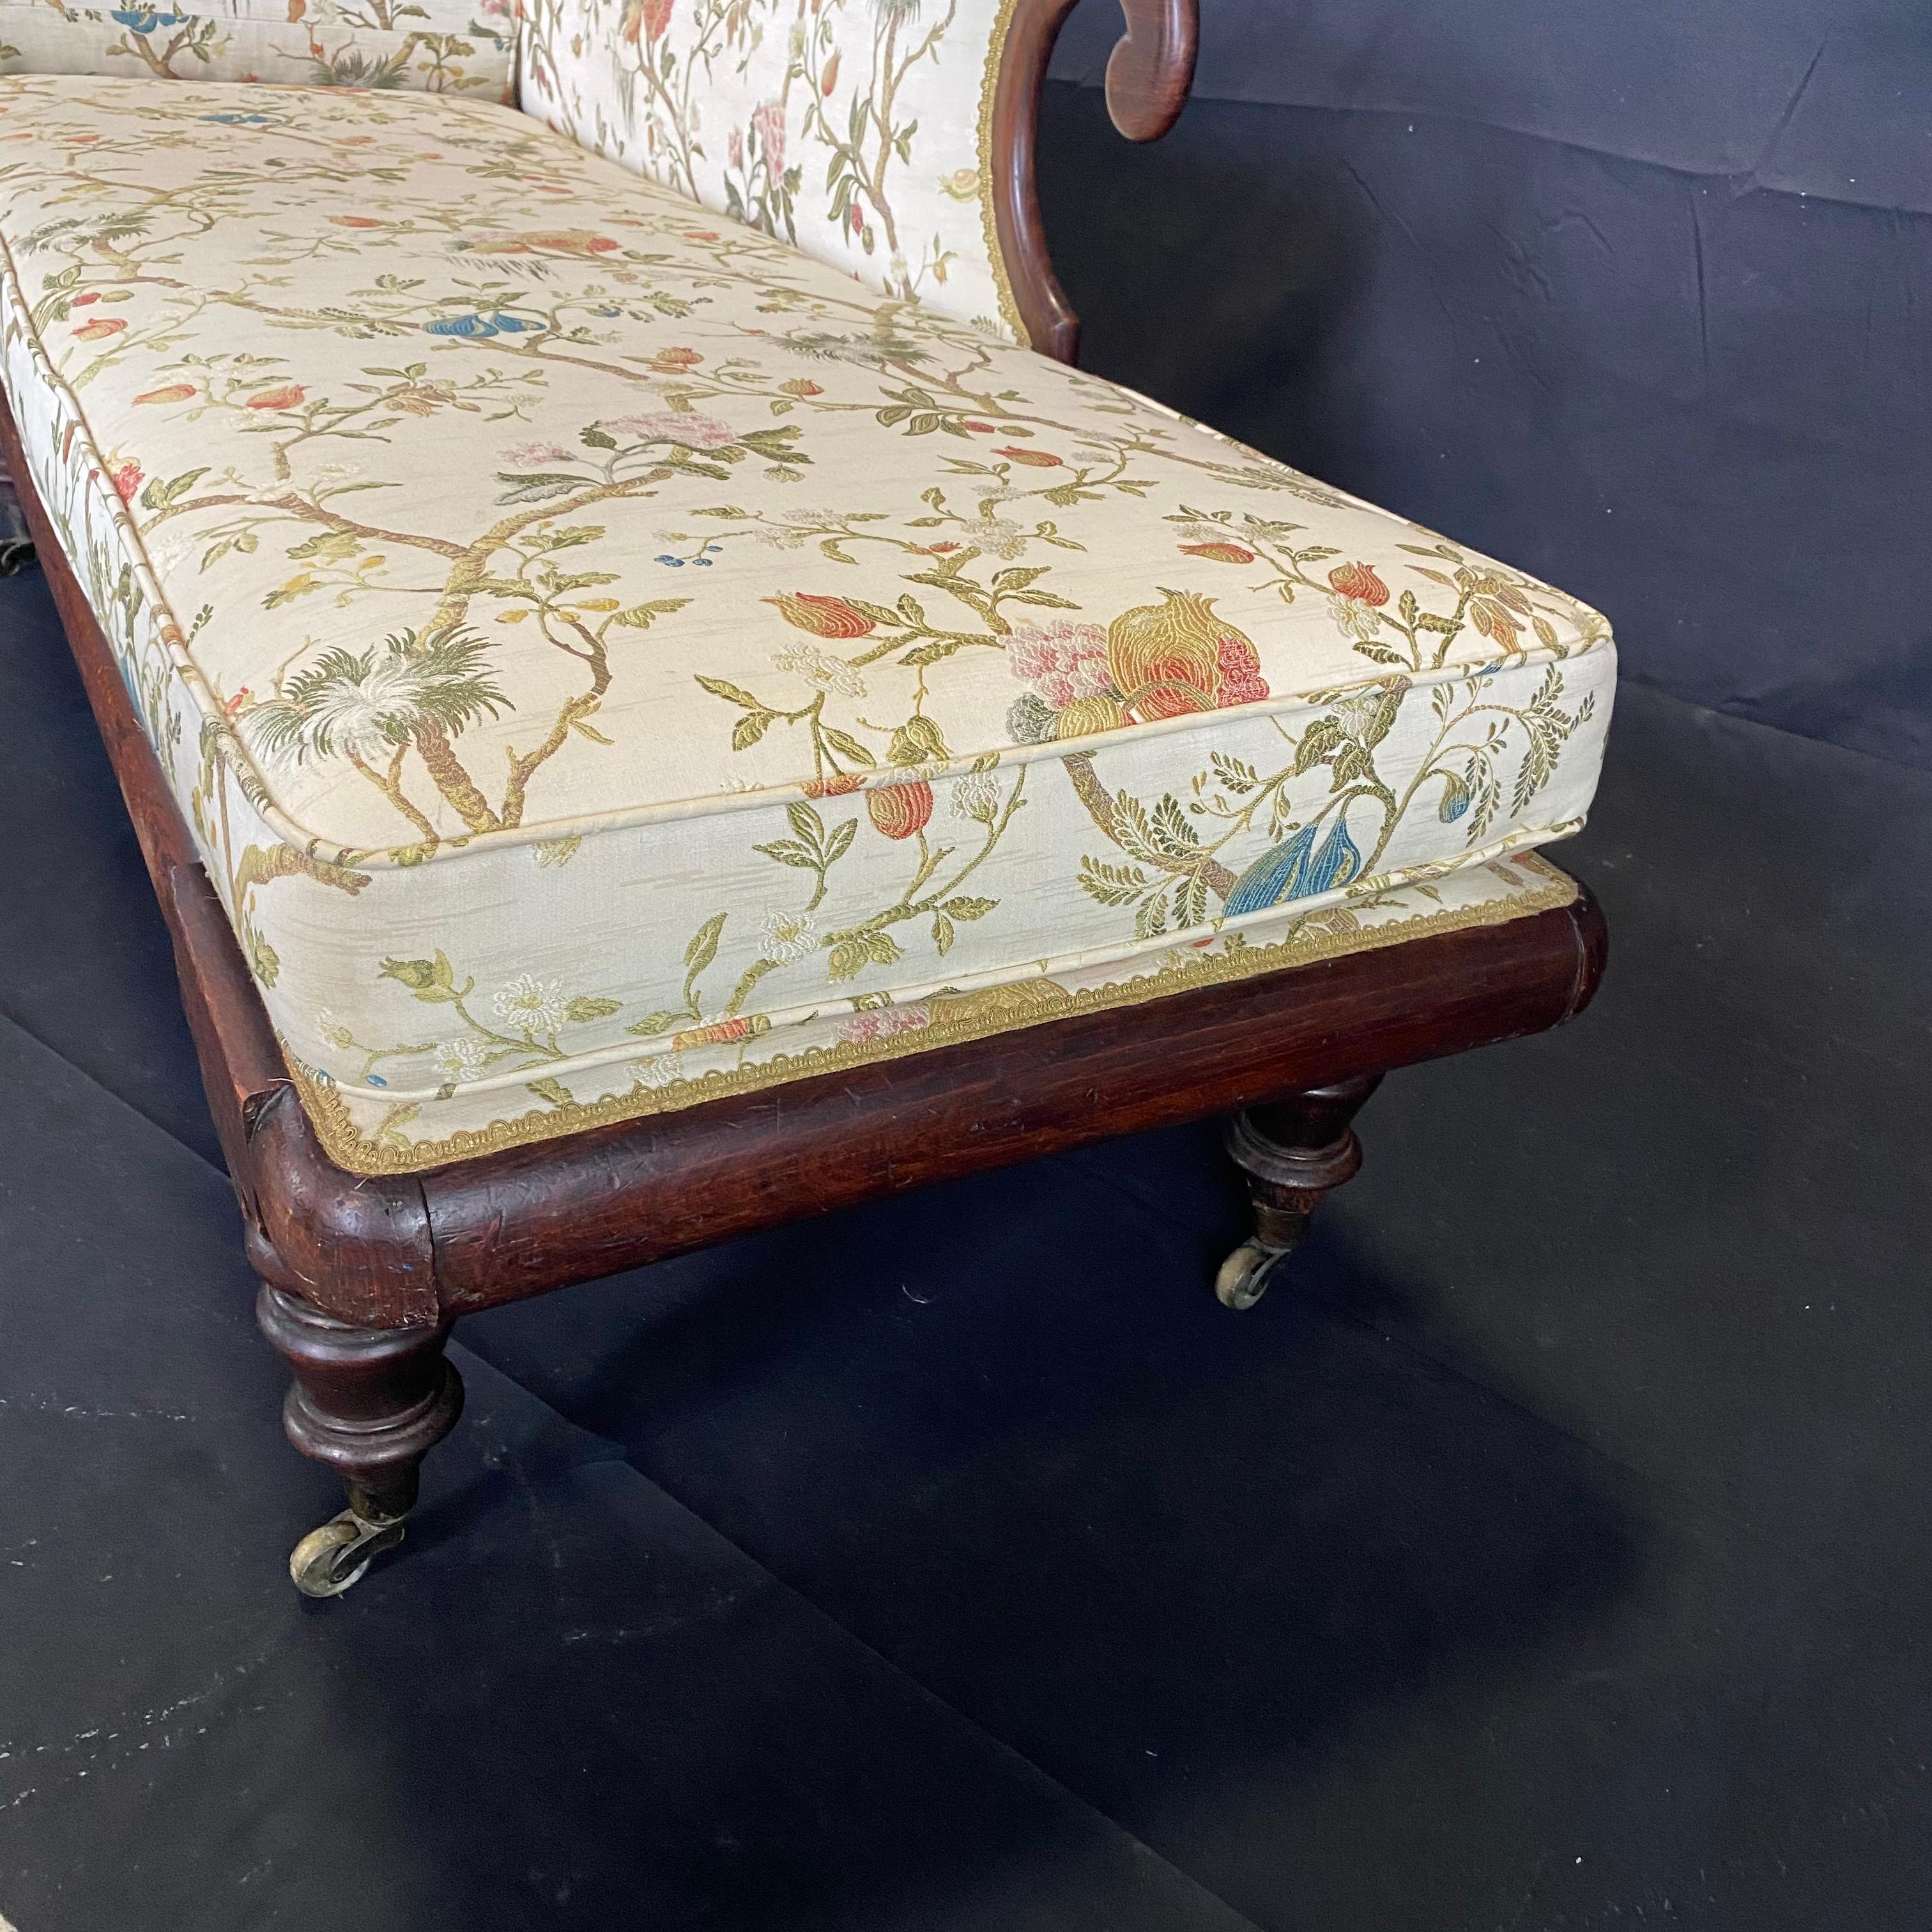 An exceptionally beautiful 19th century Empire or Directoire recamier or chaise lounge couch having graceful curves and beautiful recent ivory silk fabric. It would be wonderful at the foot of a bed, in a living room or foyer, and is quite